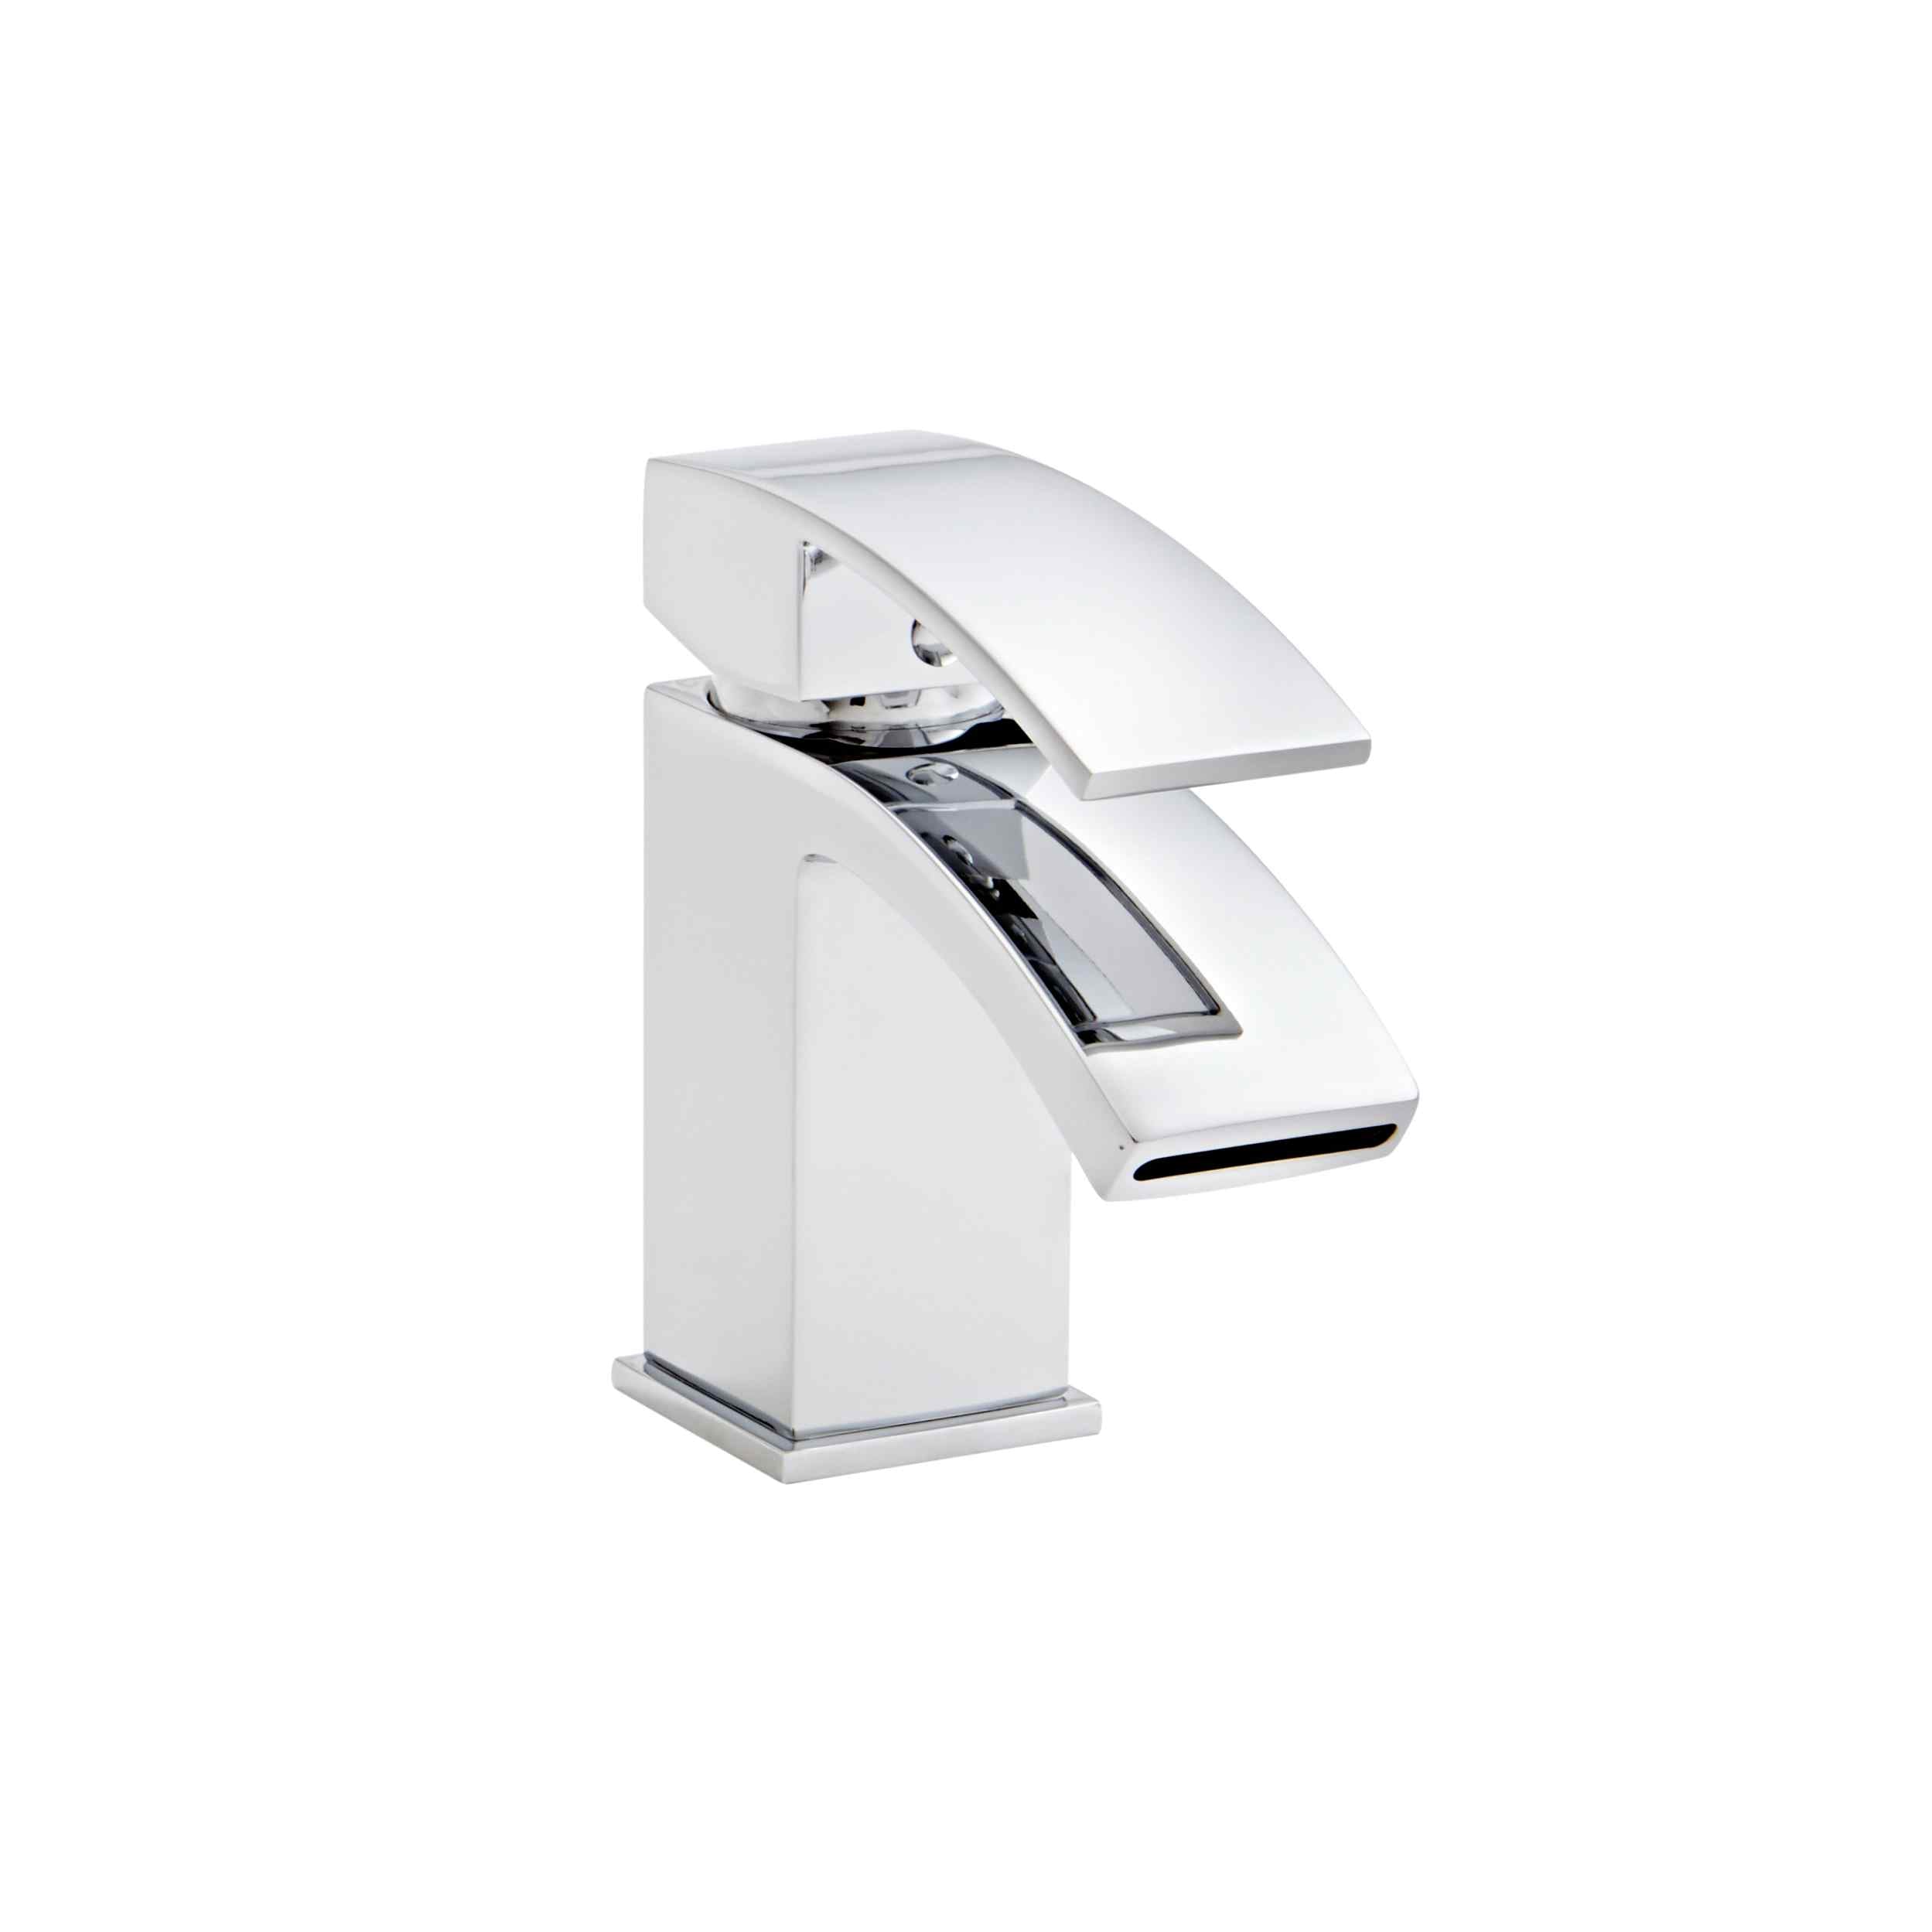 Trim White Toilet & Basin Suite with Vanity Unit - Stylish All-in-One Solution